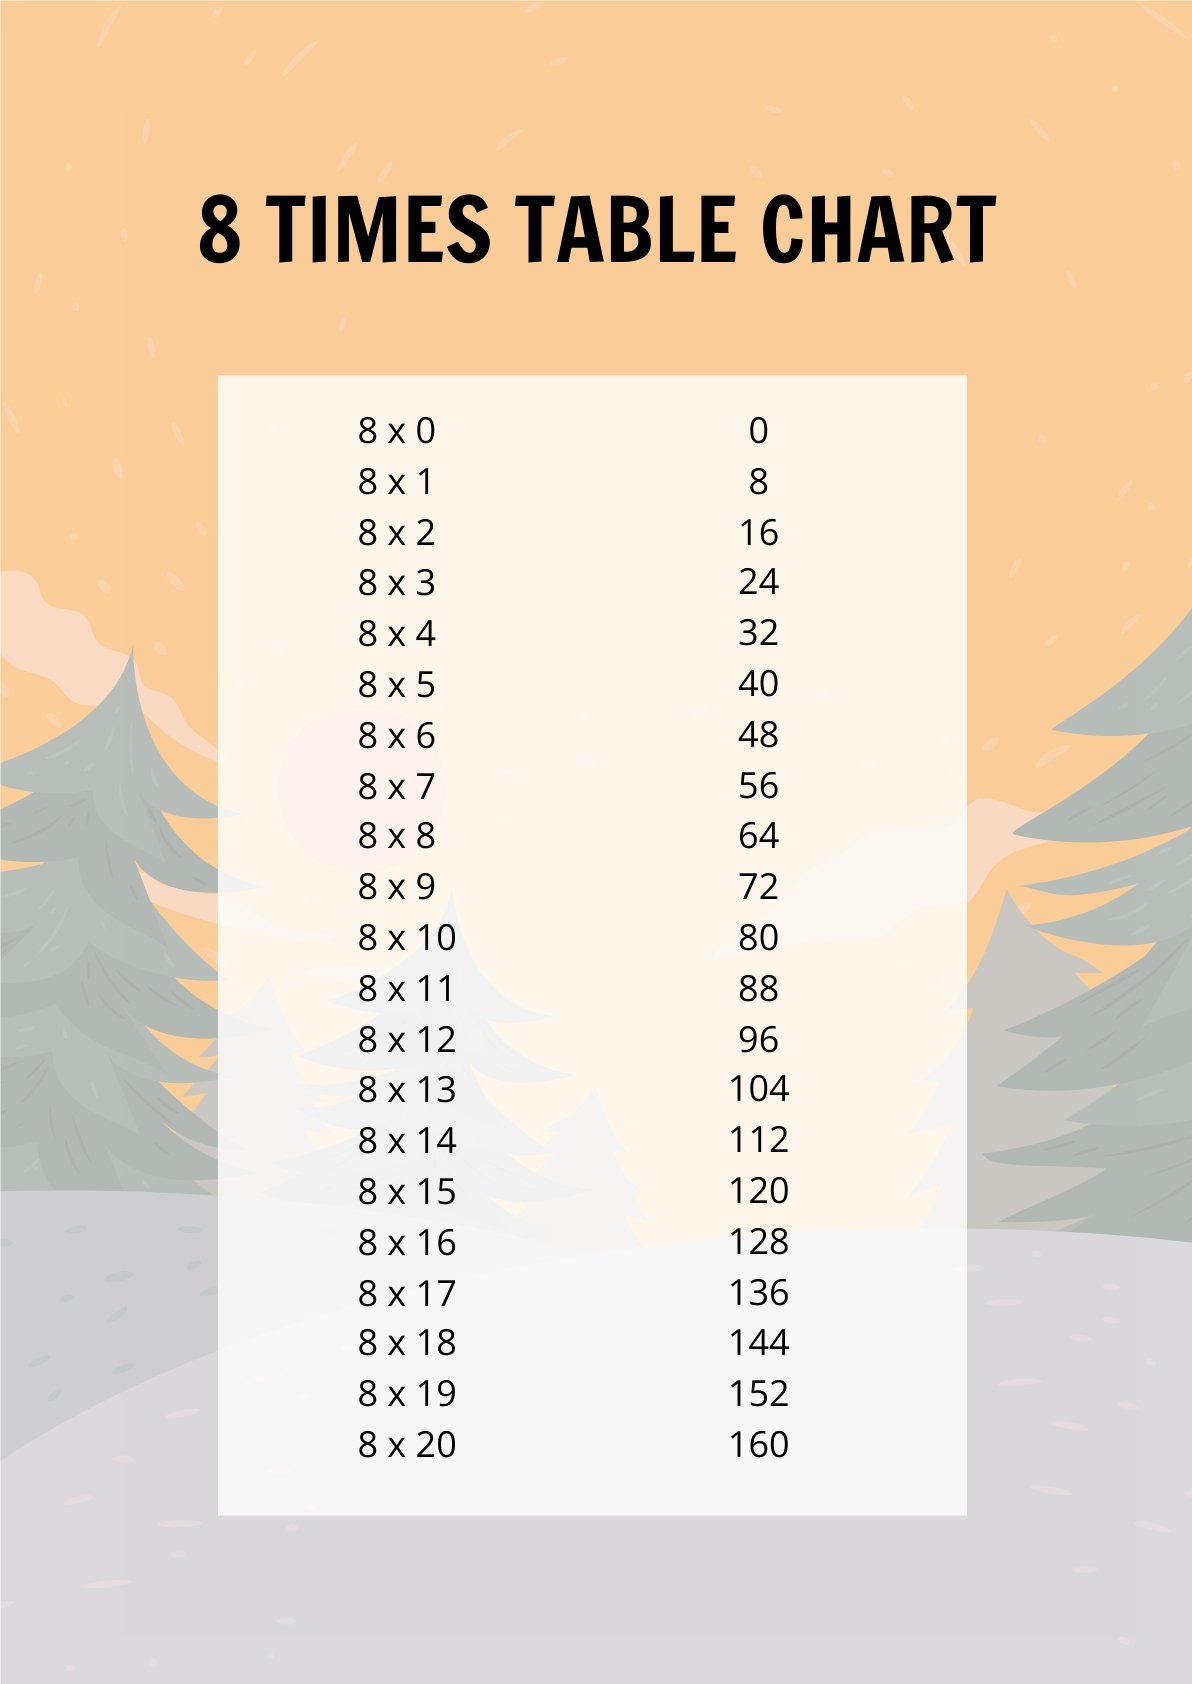 8 Times Table Chart Template in PDF